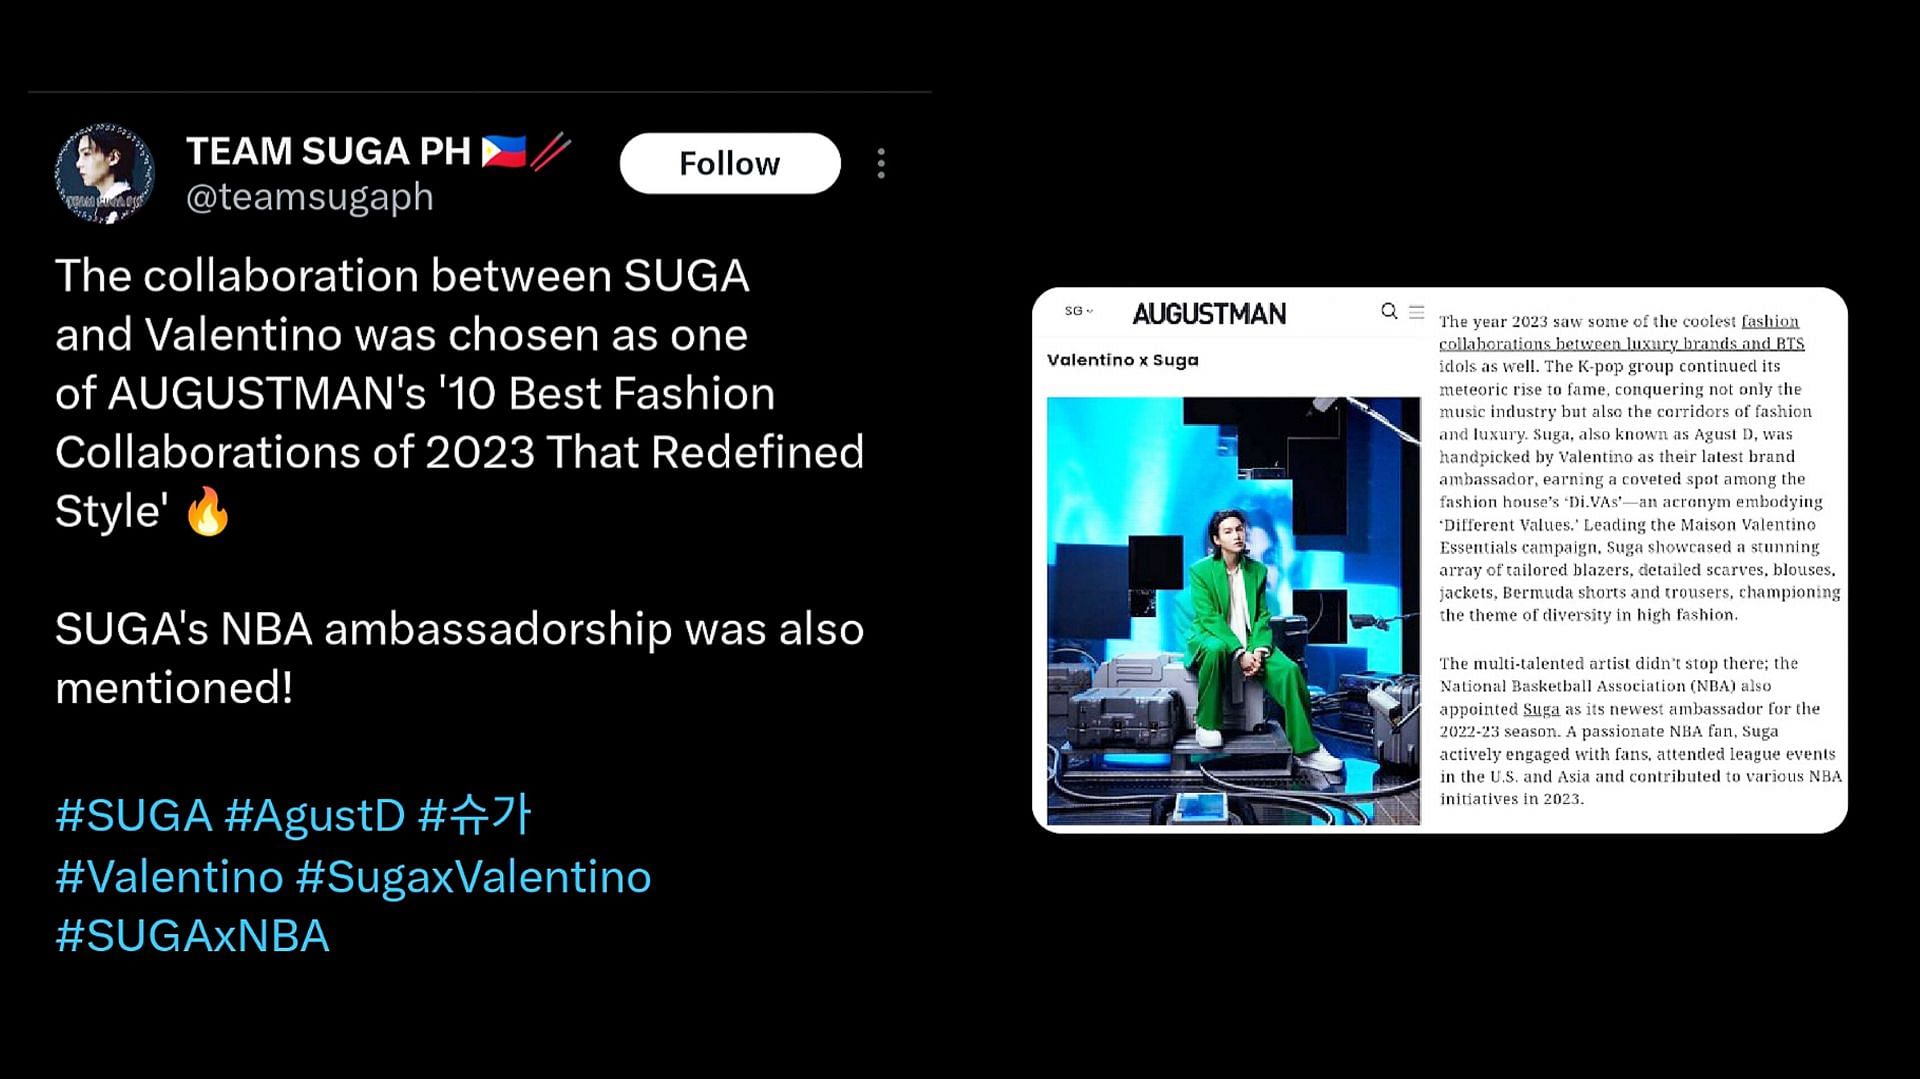 Fans rejoice as SUGA x Valentino ranks one of the 10 Best Fashion Collaborations Of 2023 That Redefined Style by AUGUSTMAN (Image via X)